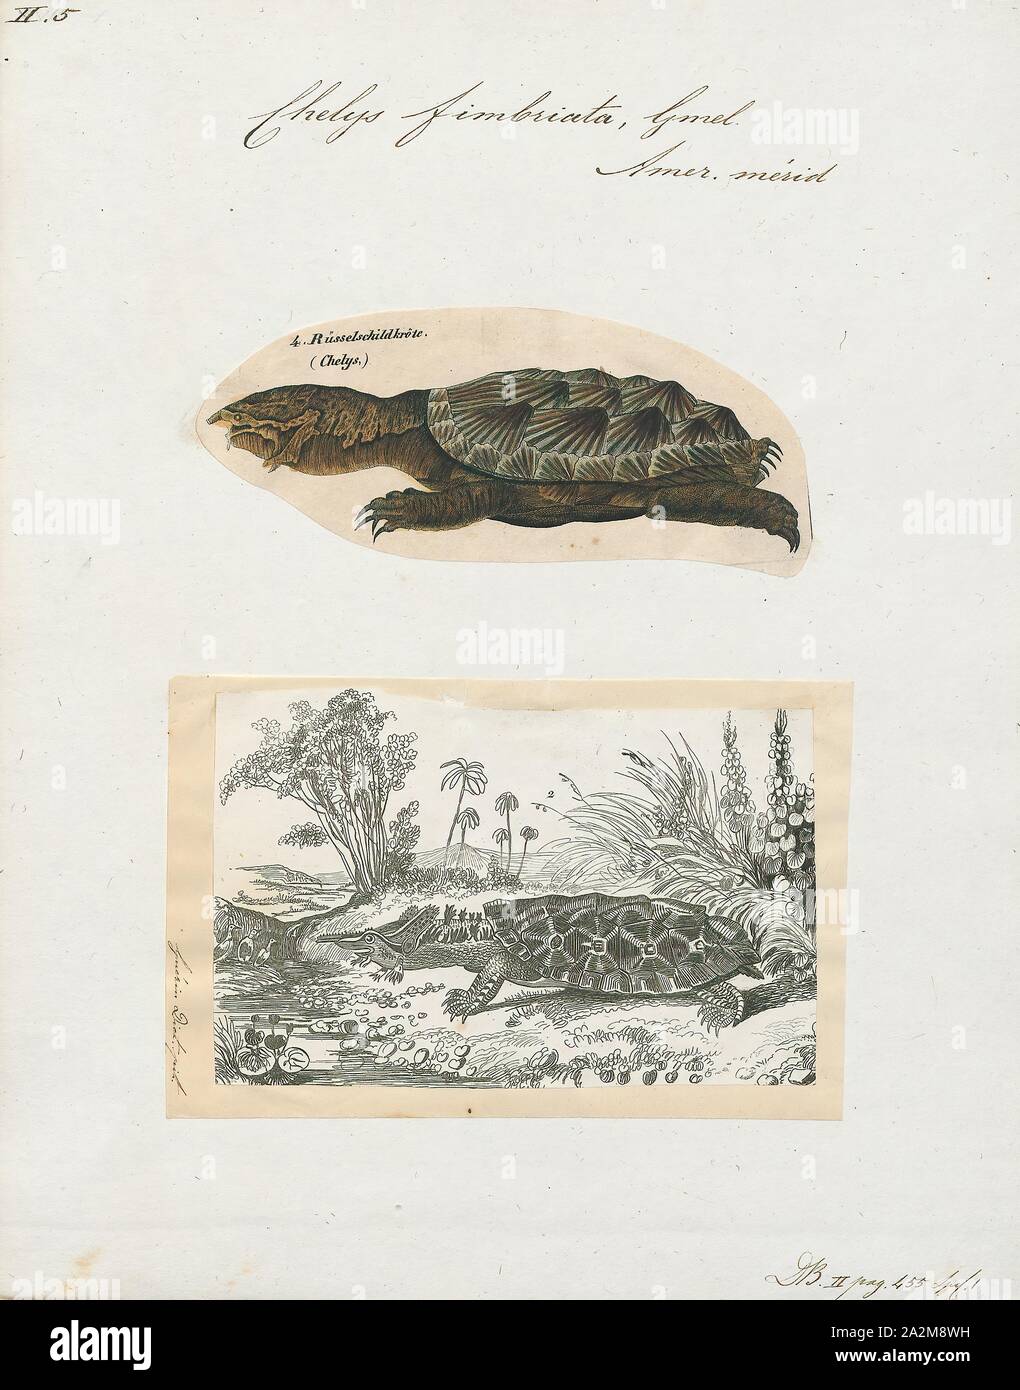 Chelys fimbriata, Print, The mata mata, mata-mata, or matamata (Chelus fimbriata) is a freshwater turtle found in South America, primarily in the Amazon and Orinoco basins. It is the only extant species in the genus Chelus., 1700-1880 Stock Photo